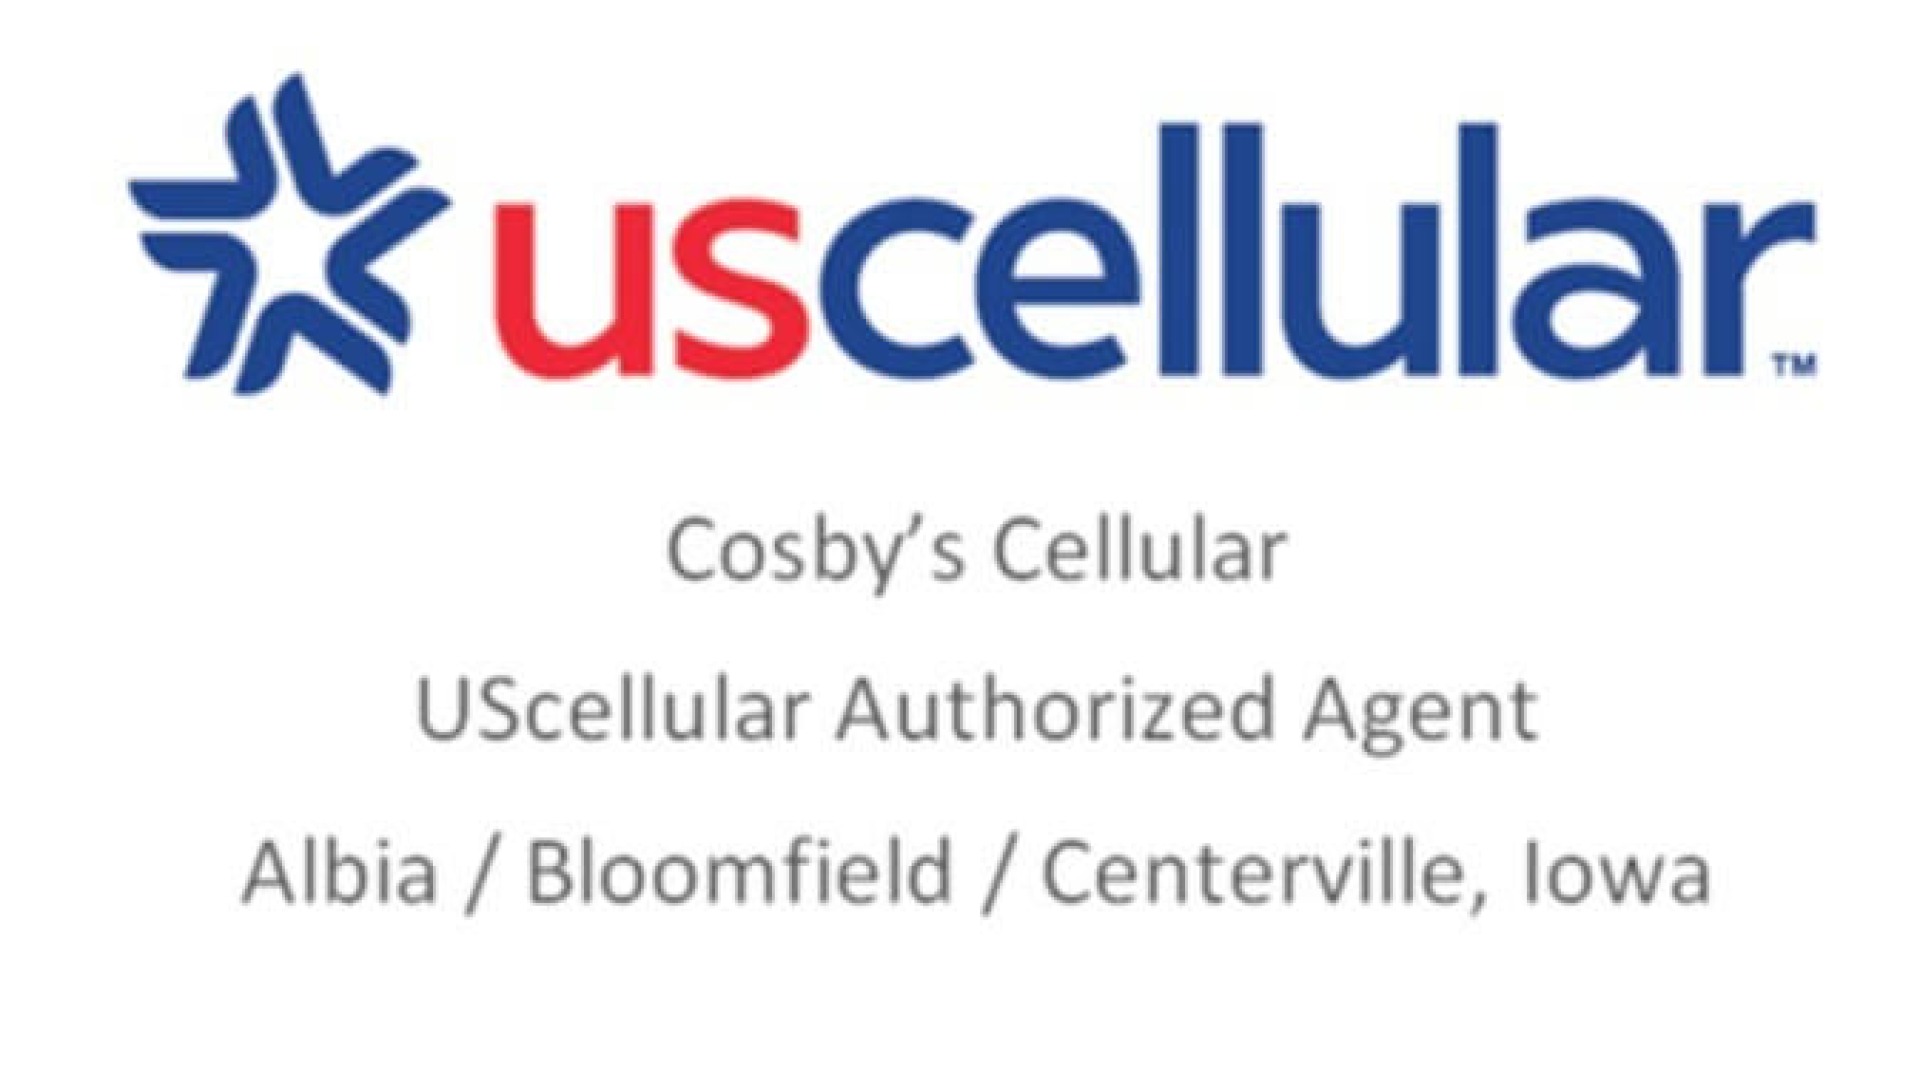 US Cellular Cosby's Cellular - UScellular Authorized Agent in Albia, Bloomfield, and Centerville,Iowa